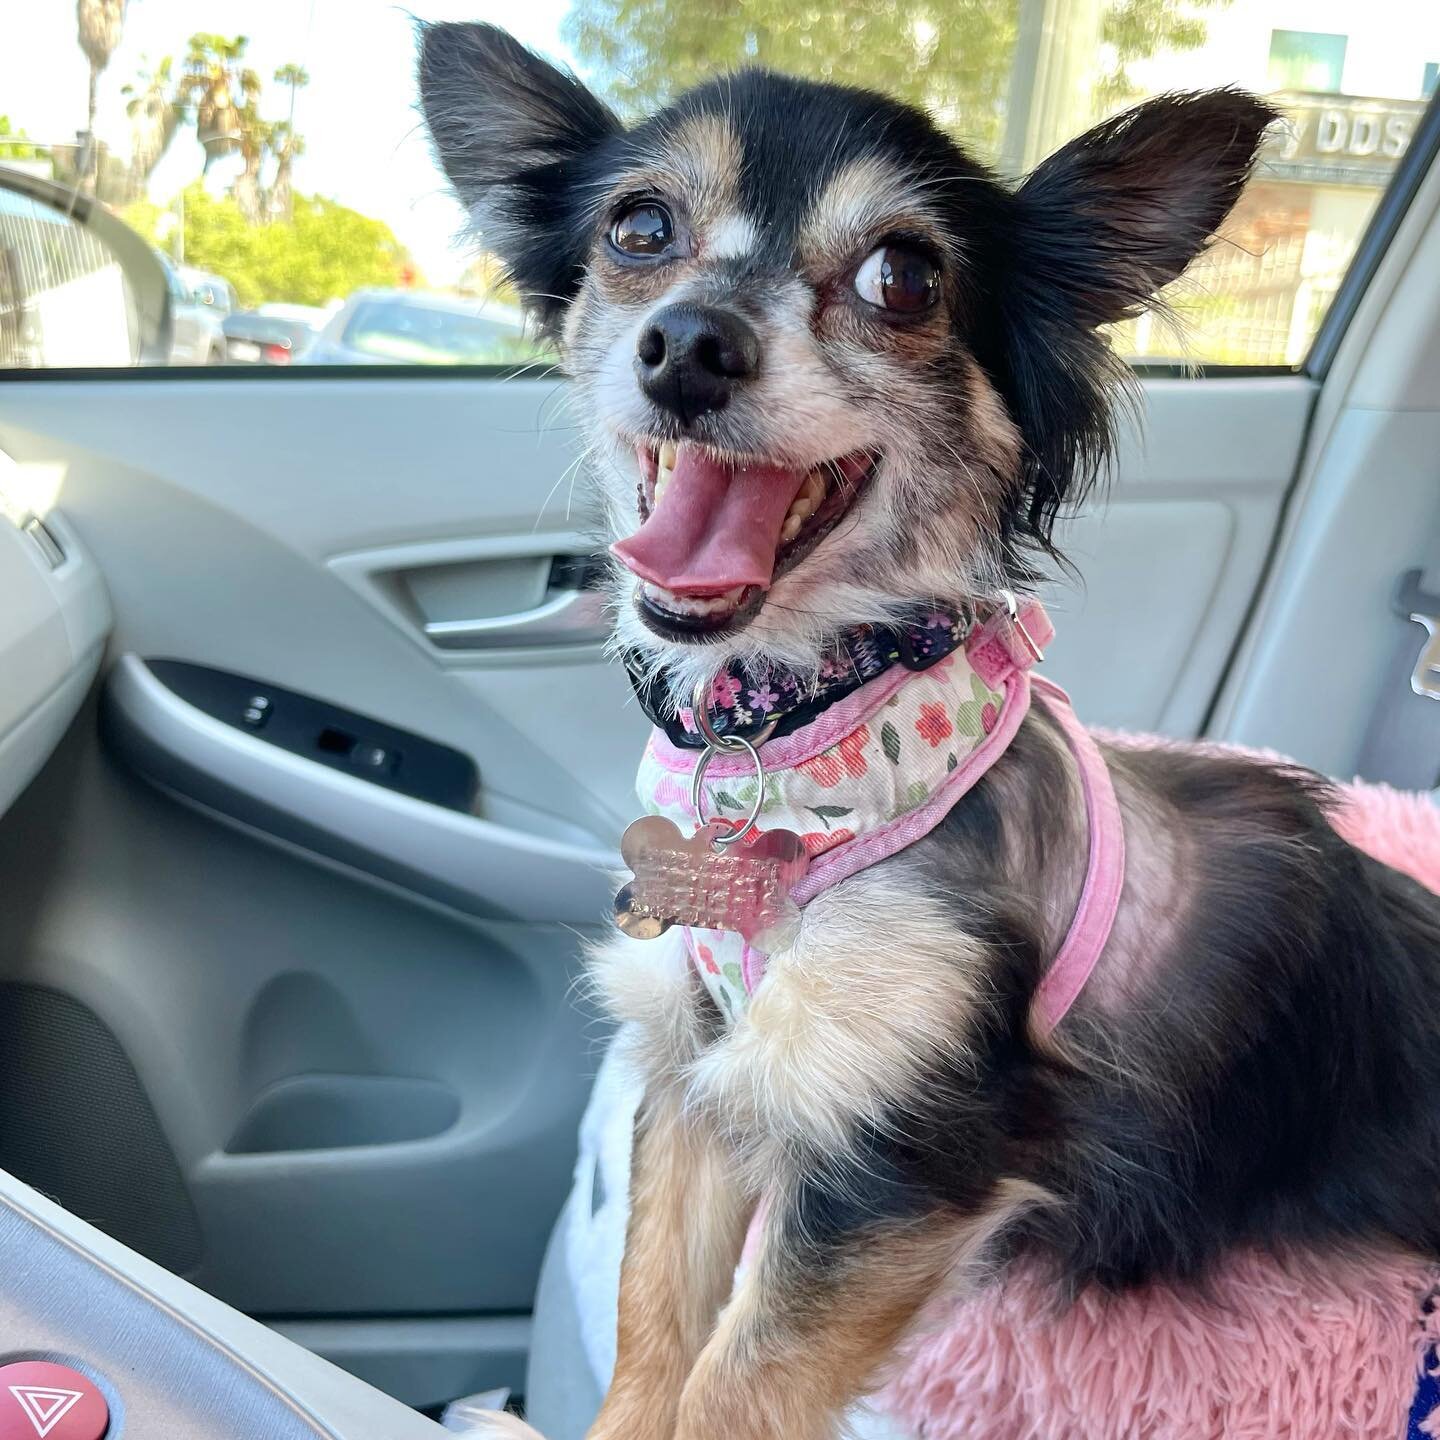 THIS TINY SURVIVOR! Little six pound Darlene McBean was found stray and had been attacked by a large dog and had a horrific puncture to her neck. Our friends at Tulare Animal Care scooped her up and took her in. She was put under, and they cleaned he